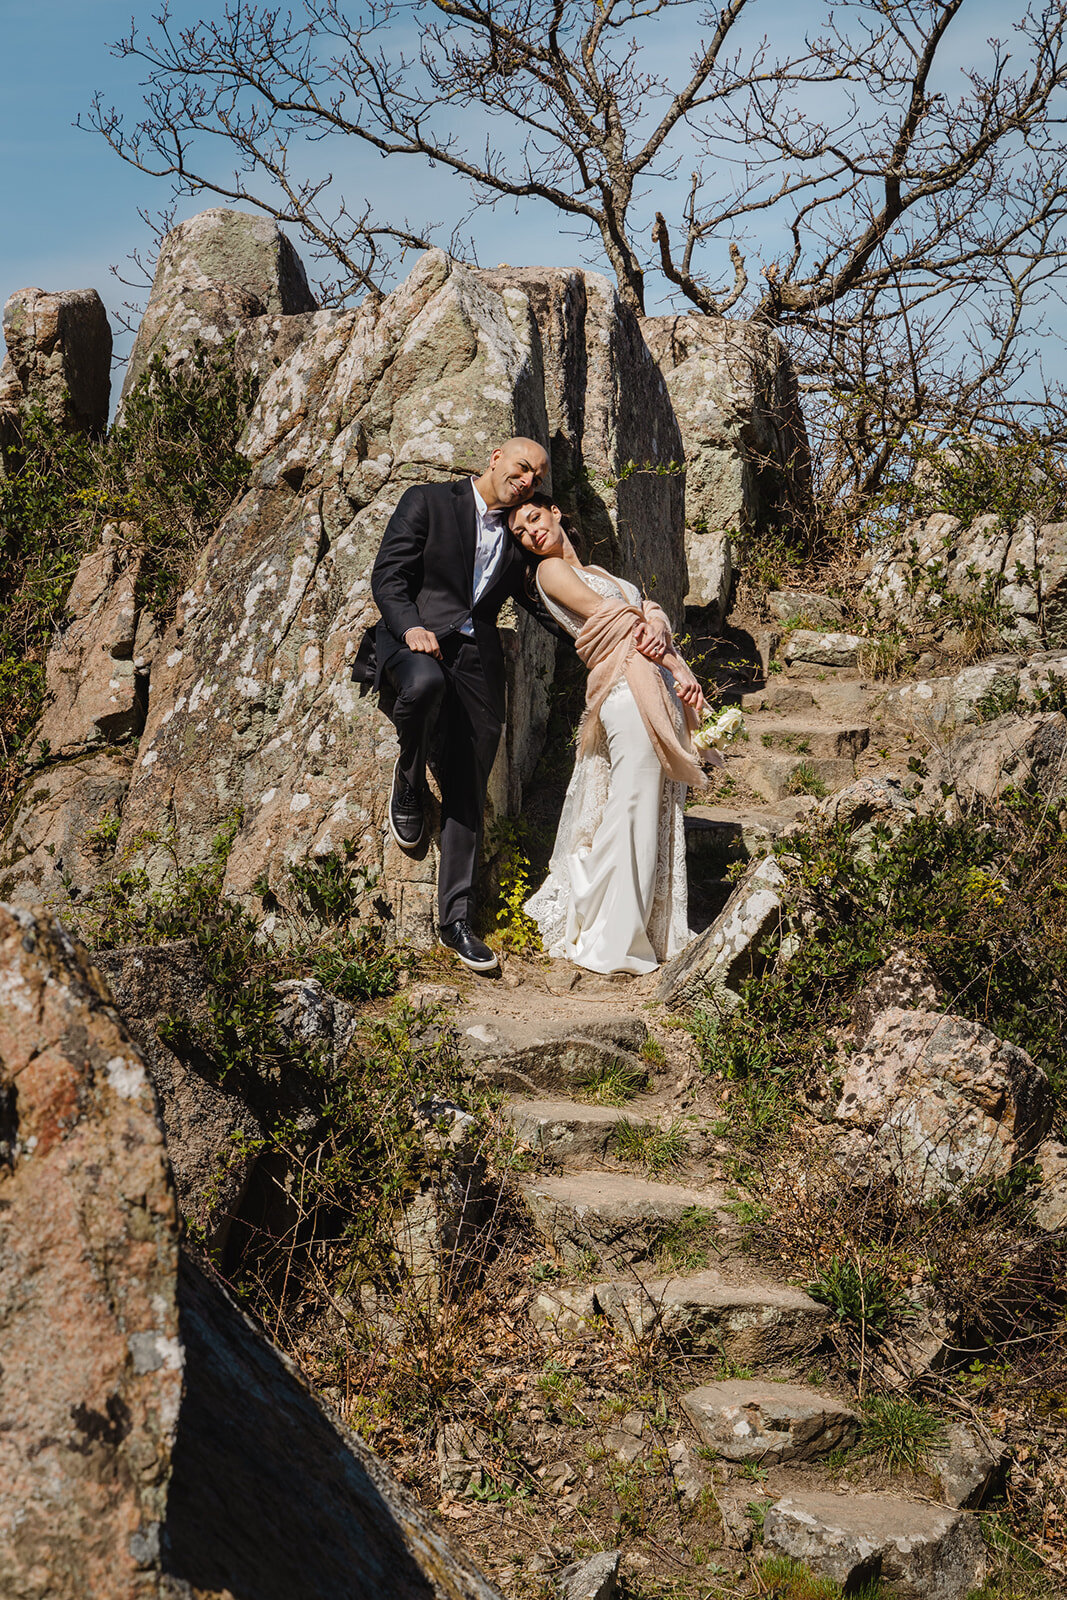 Newlyweds posing on cliffs of Bornholm - the best island for wedding abroad for two